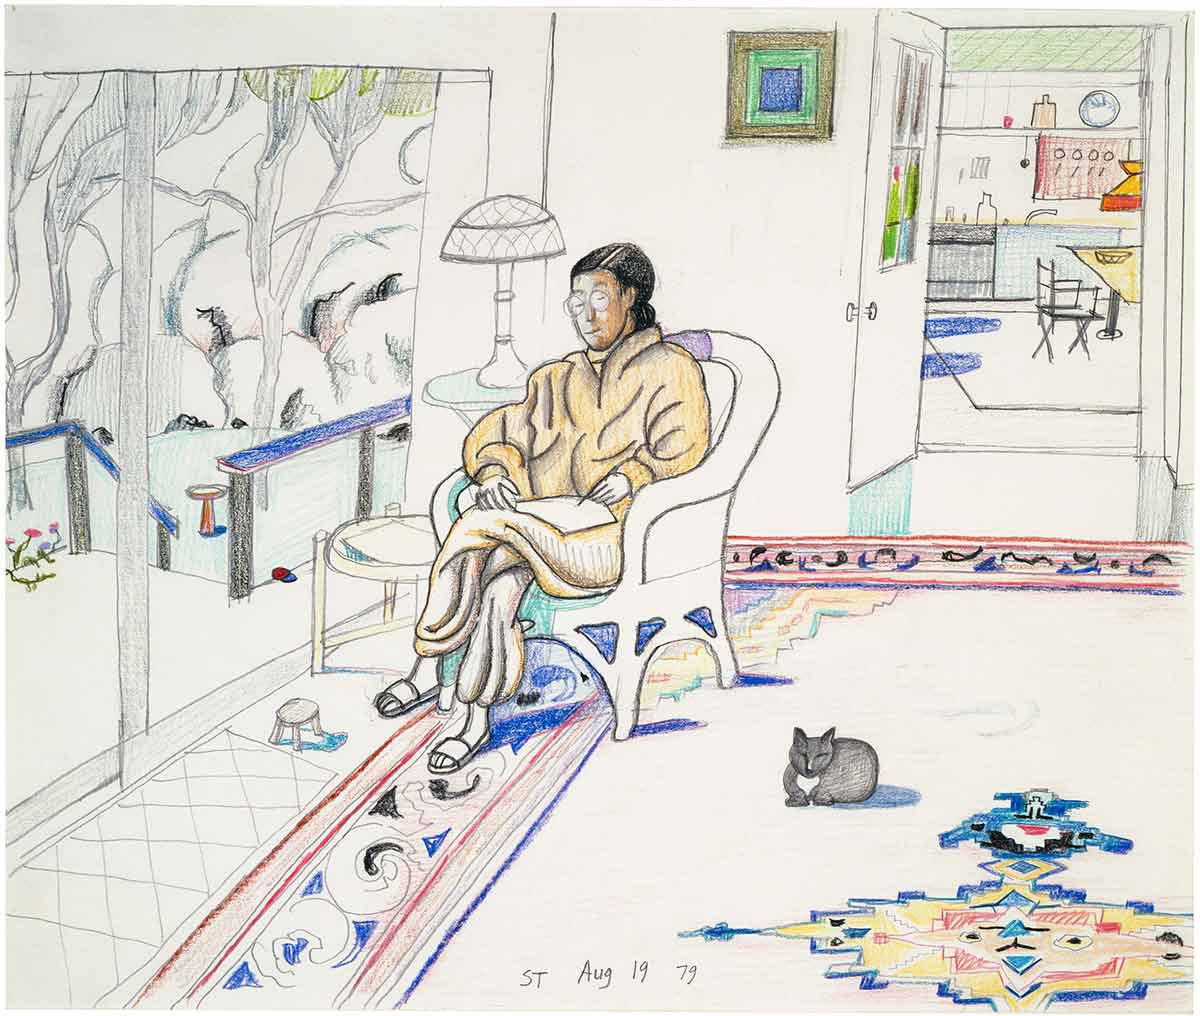 Daniela Roman in Amagansett, August 19, 1979. Pencil and crayon on paper, 14 ½ x 16 ½ in. Private collection. Included in Dal Vero. 